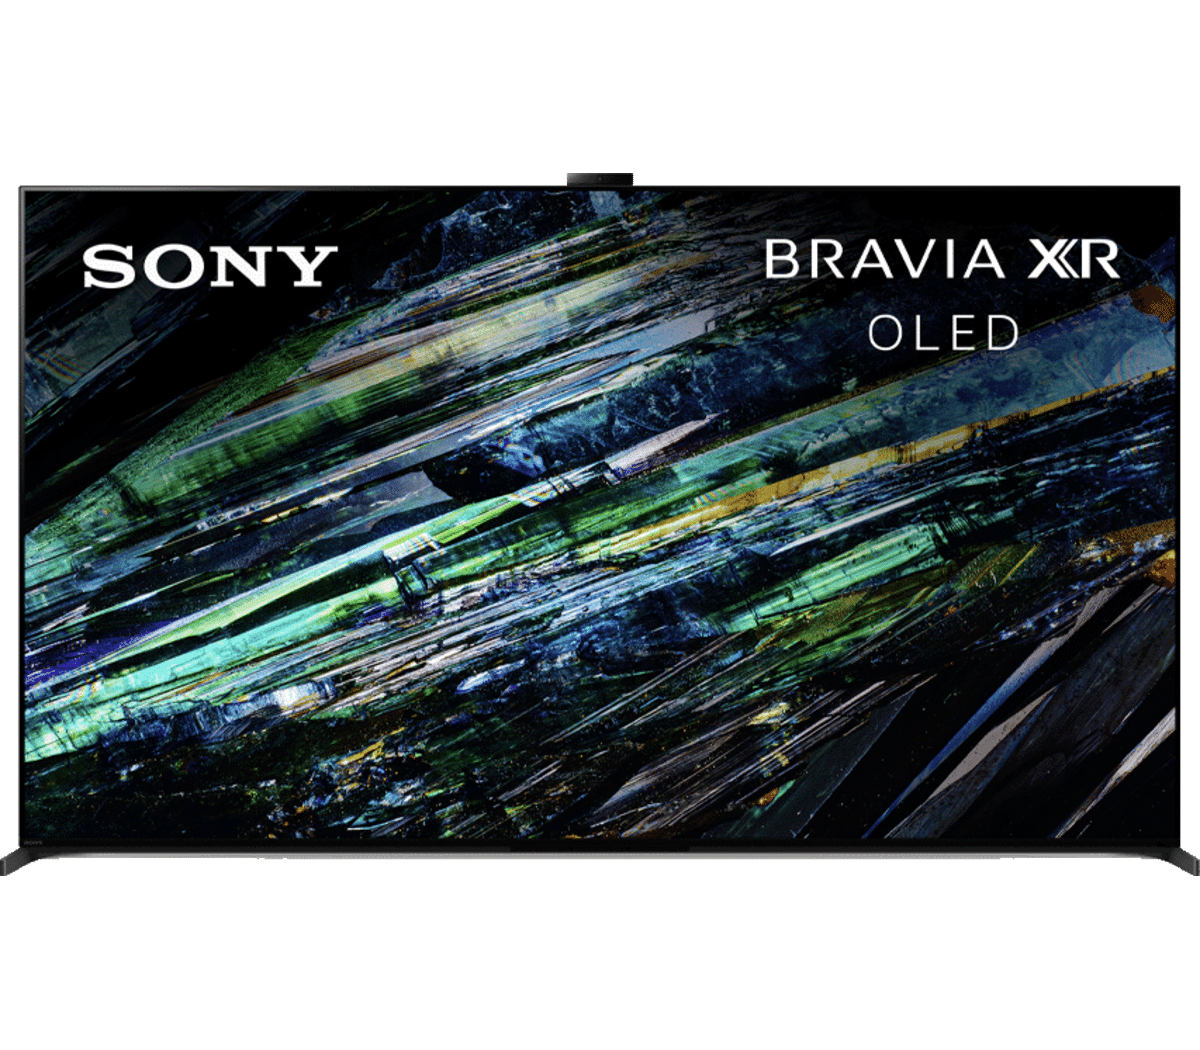 How to Update Your Sony Bravia TV